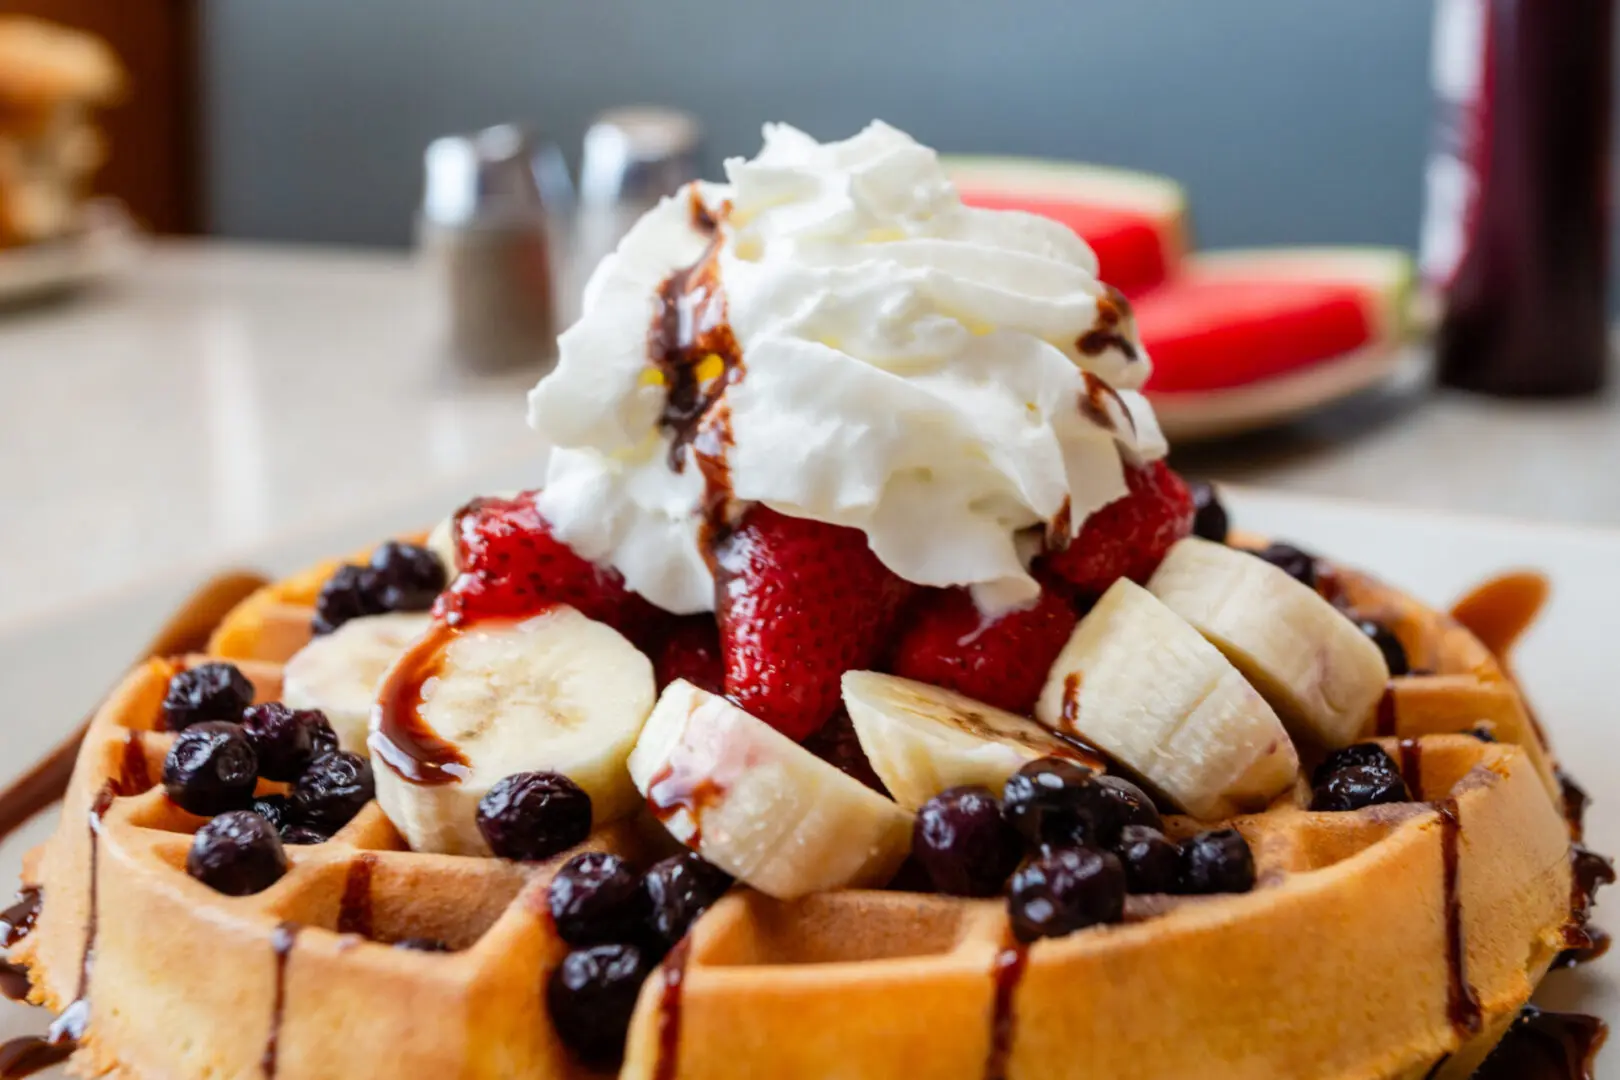 A waffle with bananas, strawberries and blueberries.